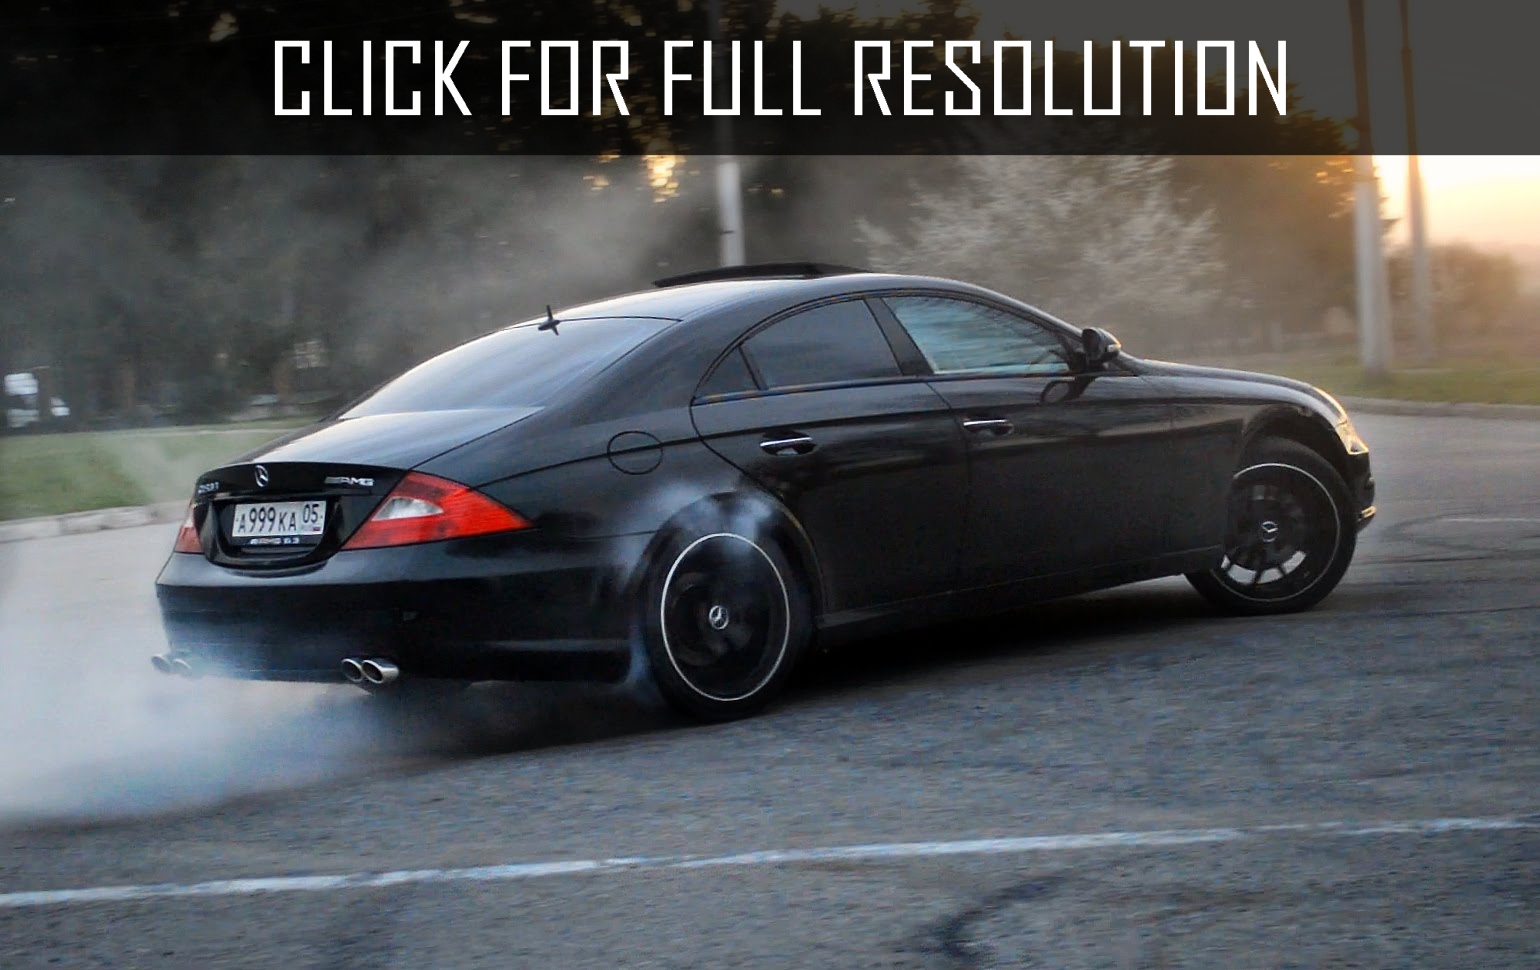 Mercedes Benz Cls 55 Amg amazing photo gallery, some information and